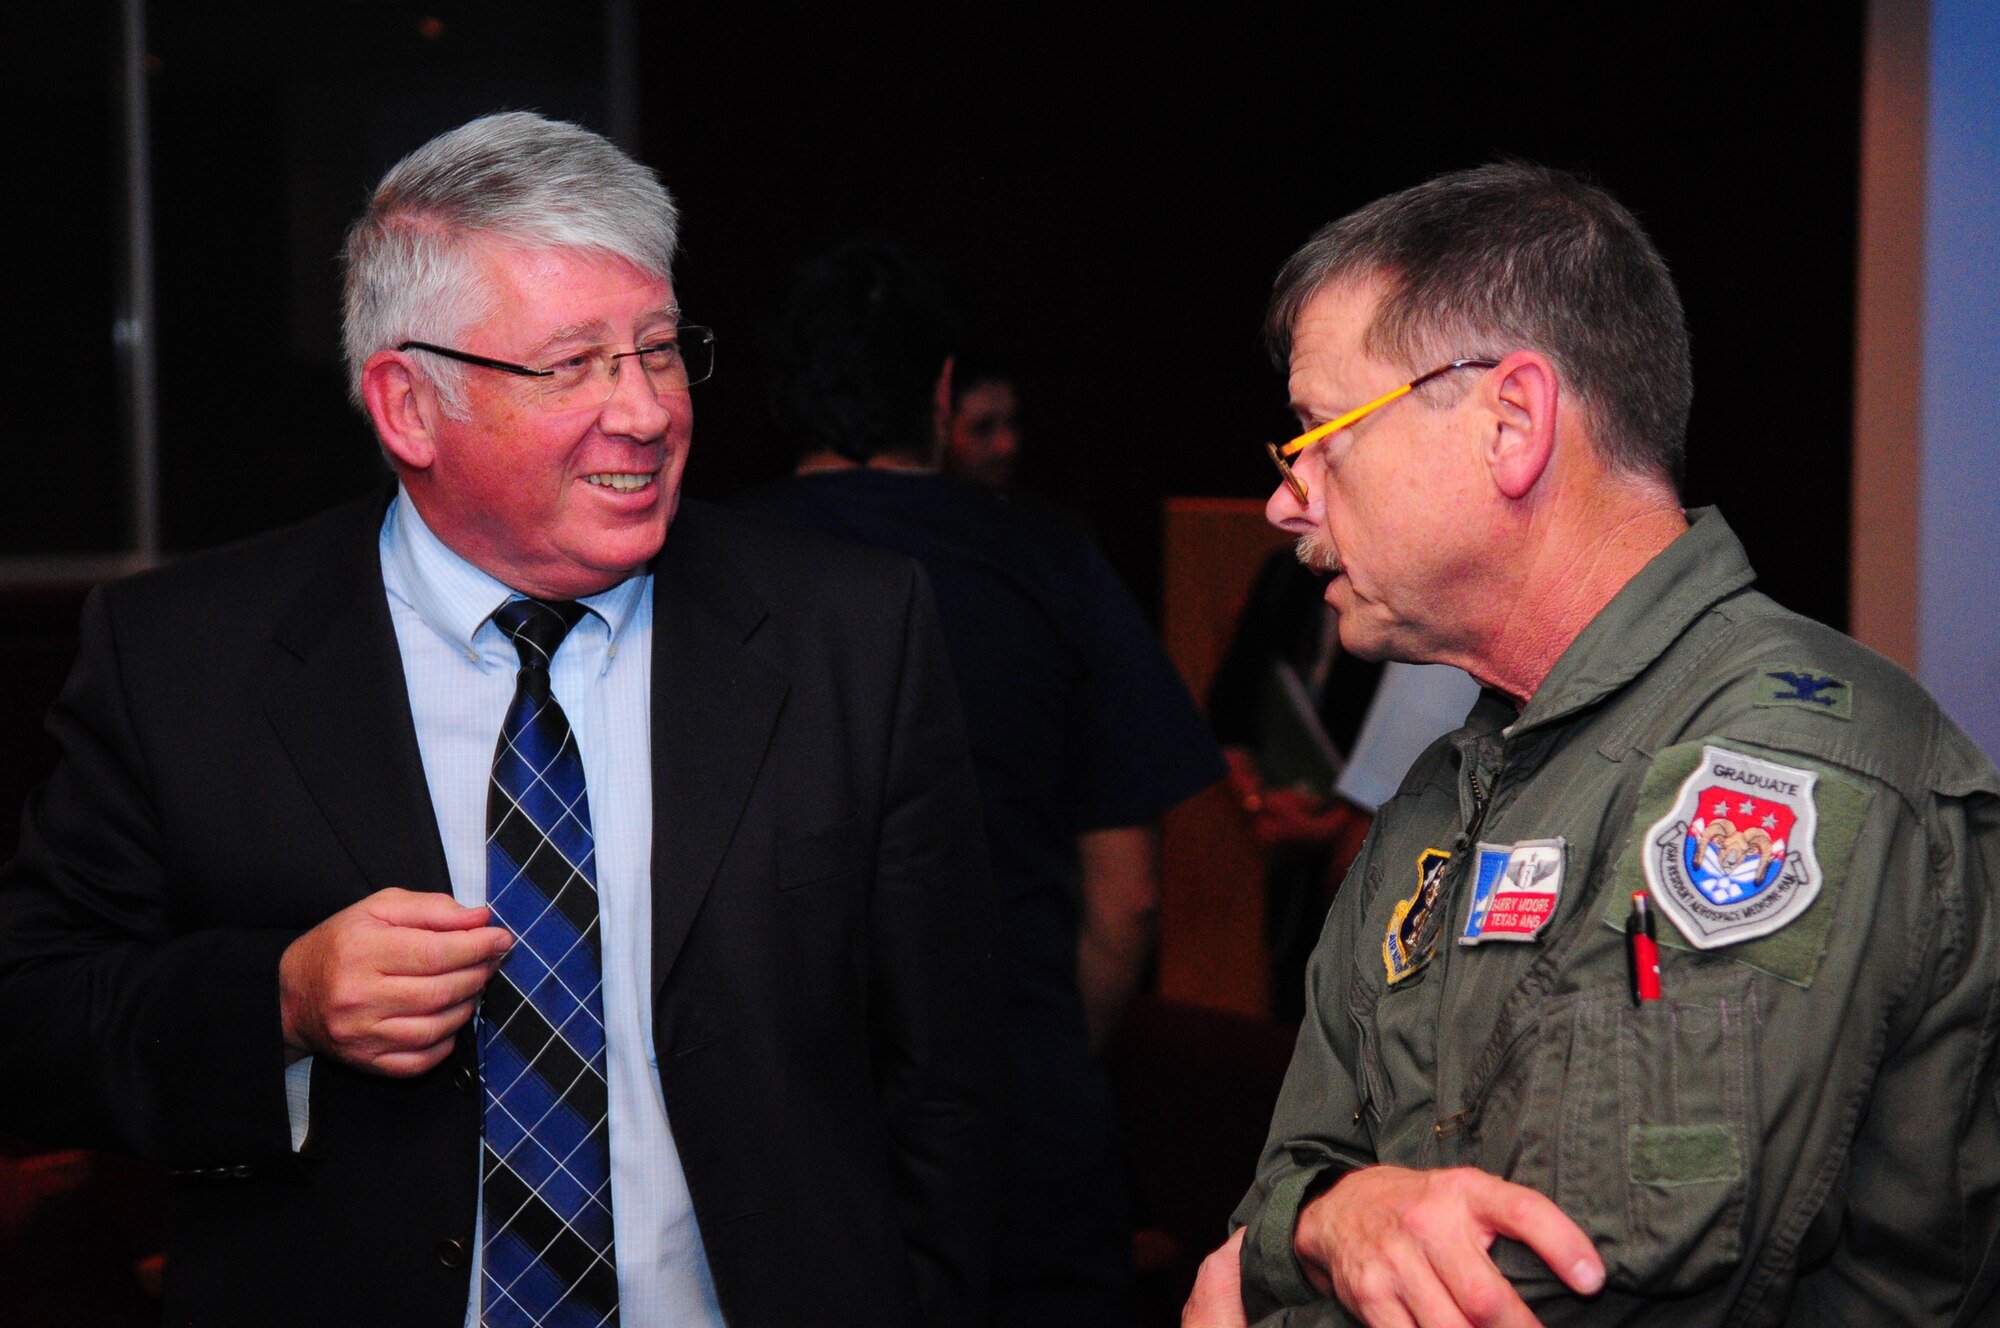 Maj. Gen. Charles Cunliffe (Ret.), Fuerza Aerea Chile (FACh) discusses emergency medical and aeromedical evacuation issues with Colonel Garrie Moore, Air Surgeon for the State of Texas, during a Subject Matter Expert (SME) exchange presentation March 24, 2014 at the FACh hospital in Santiago, Chile.  The SME exchange of information is part of the U.S. National Guard?s State Partnership Program (SPP) and is held during the annual Chilean FIDAE Air Show. (U.S. Air National Guard photo by Senior Master Sgt. Mike Arellano / Released)